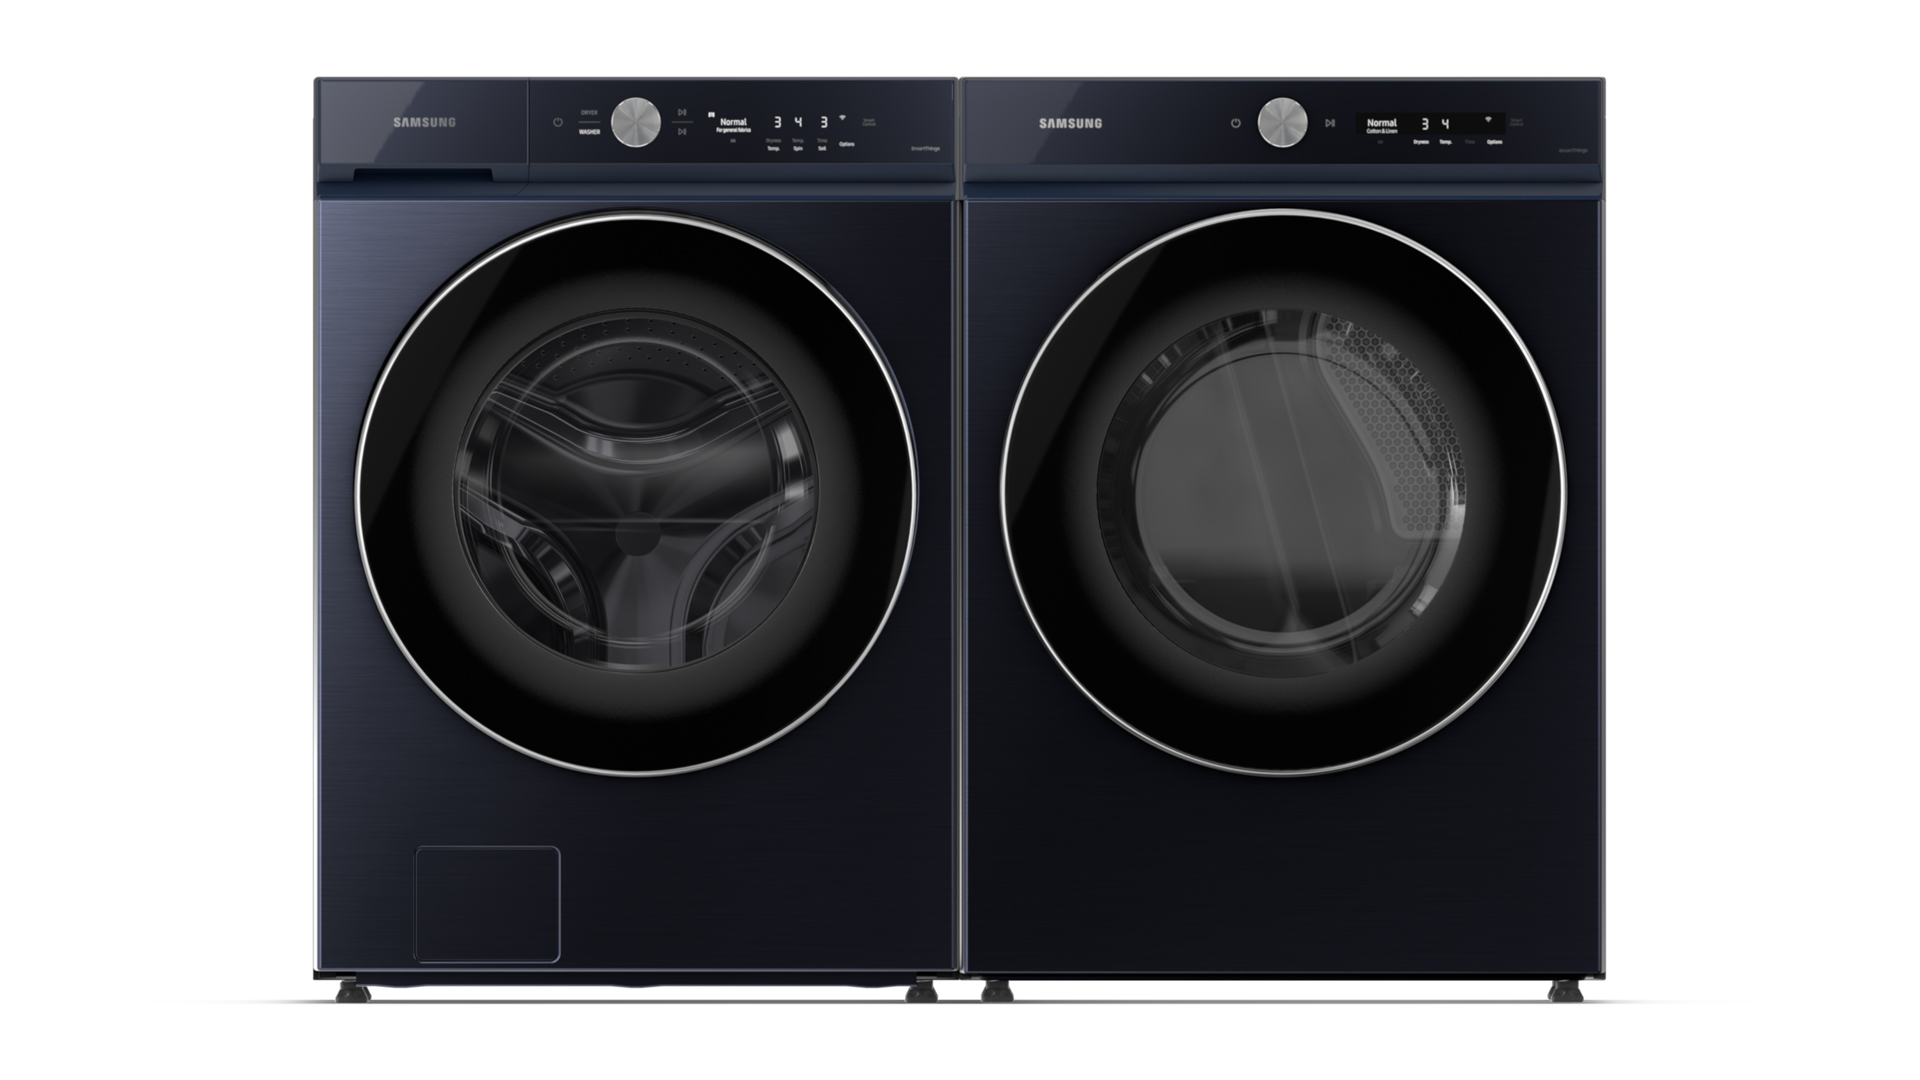 Samsung's Bespoke Front Load Washer and Dryer with SmartThings